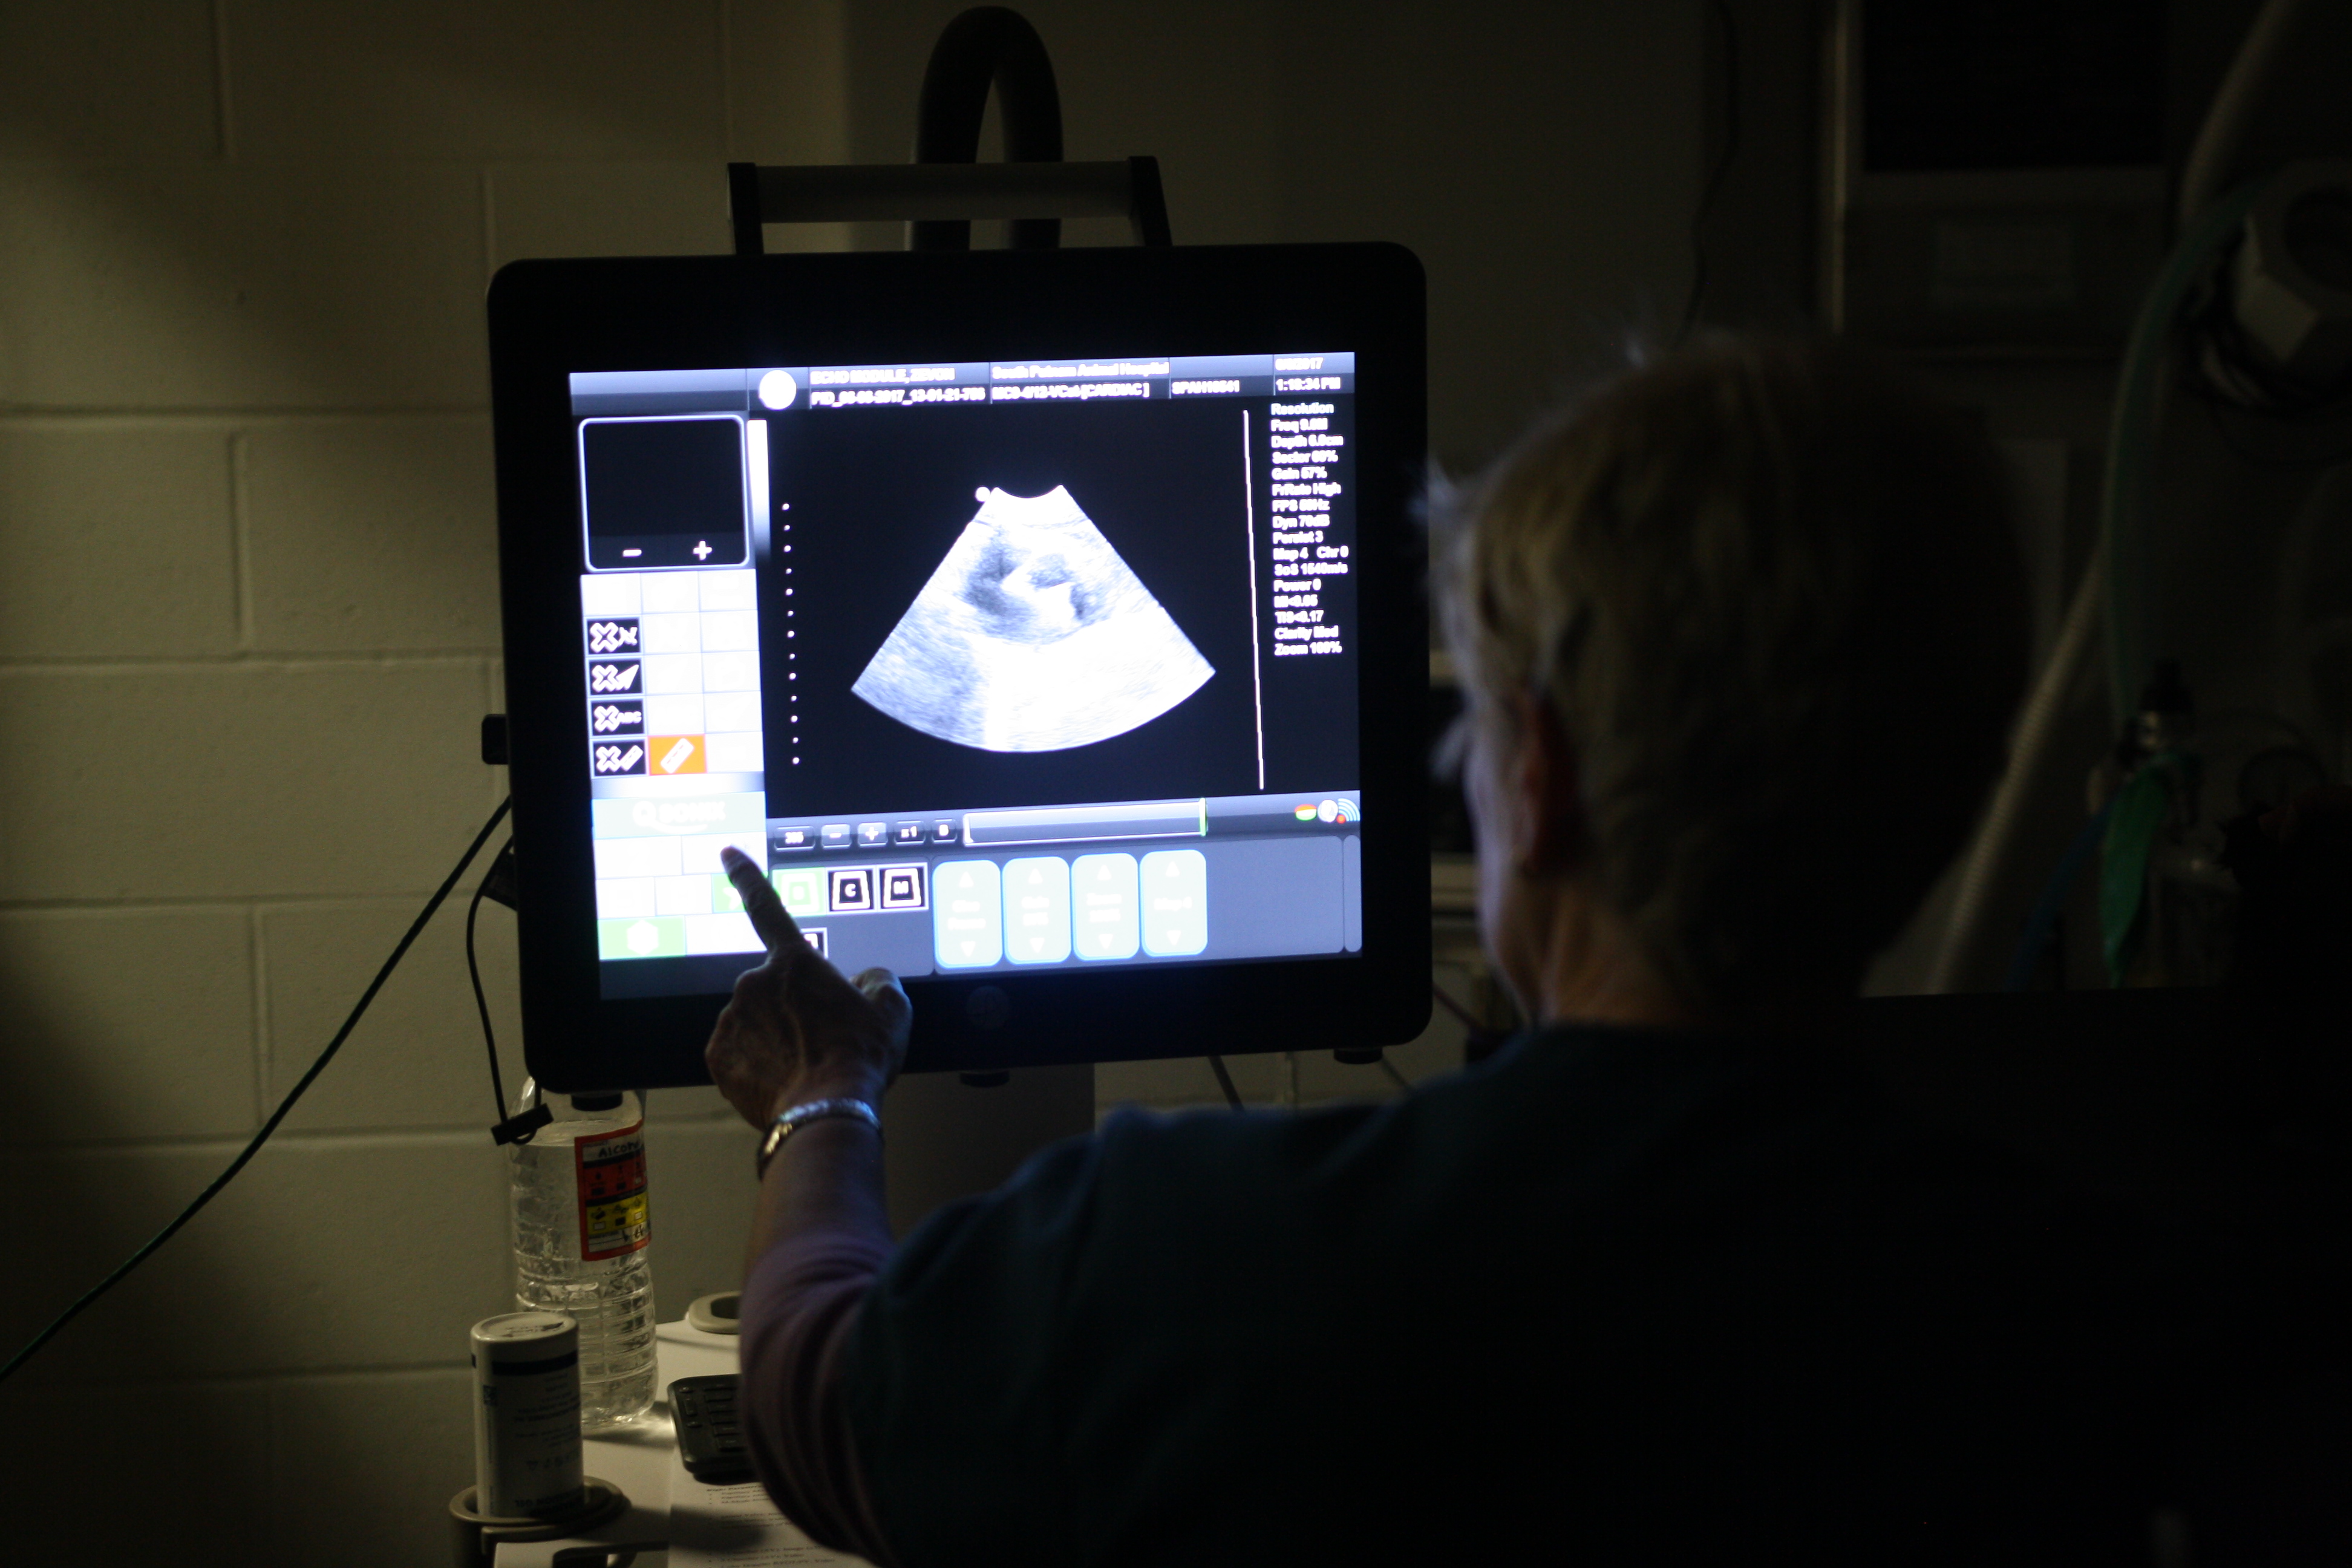 Here Dr. Heiber is analyzing an ultrasound to evaluate a pet's internal organs. Our facilities are fully equipped with the technology and equipment to help out doctors perform accurate and efficient diagnostics for a wide range of conditions.